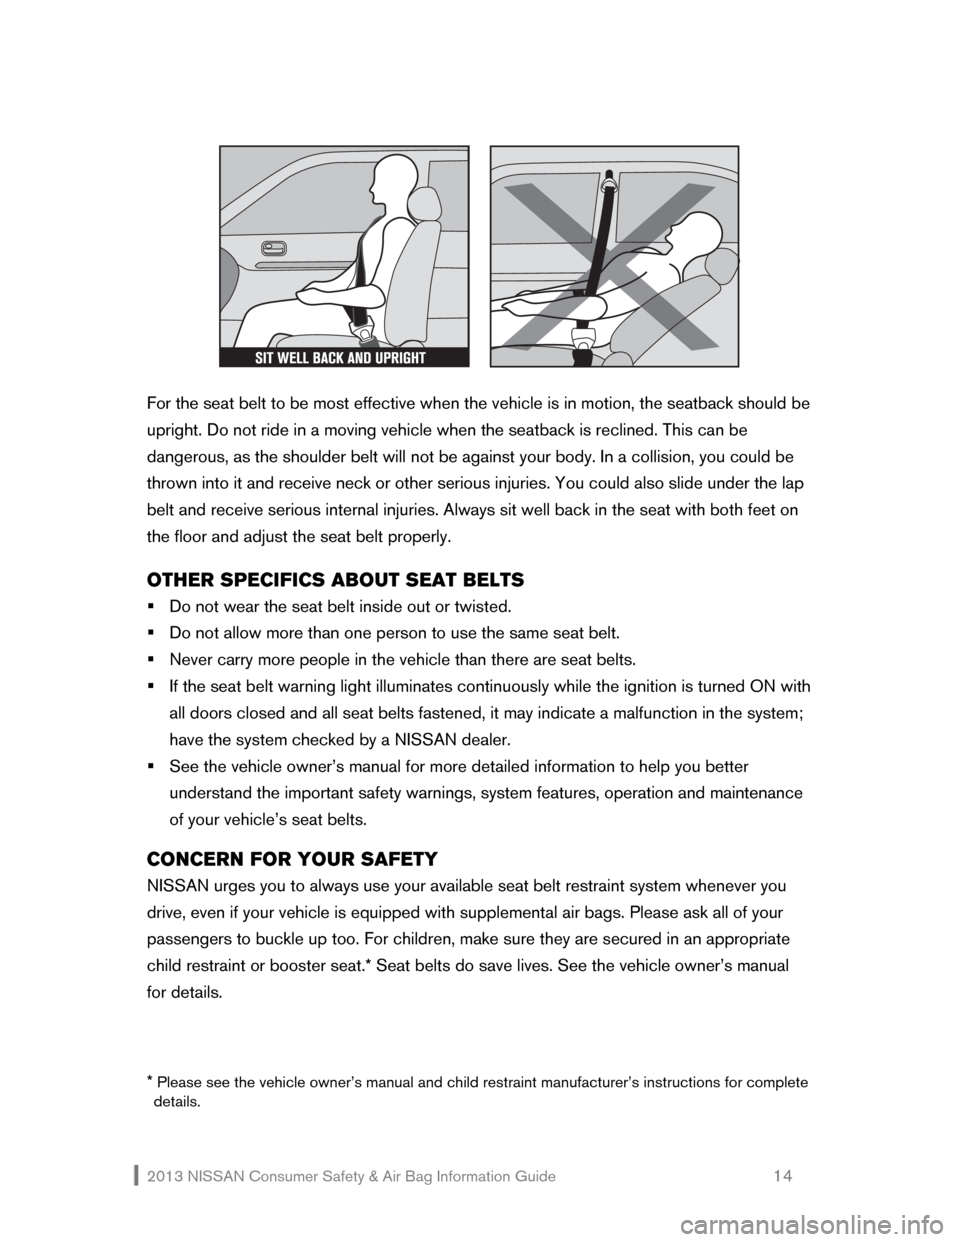 NISSAN XTERRA 2013 N50 / 2.G Consumer Safety Air Bag Information Guide 2013 NISSAN Consumer Safety & Air Bag Information Guide                                                   14 
 
 
 
For the seat belt to be most effective when the vehicle is in motion, the seatback s